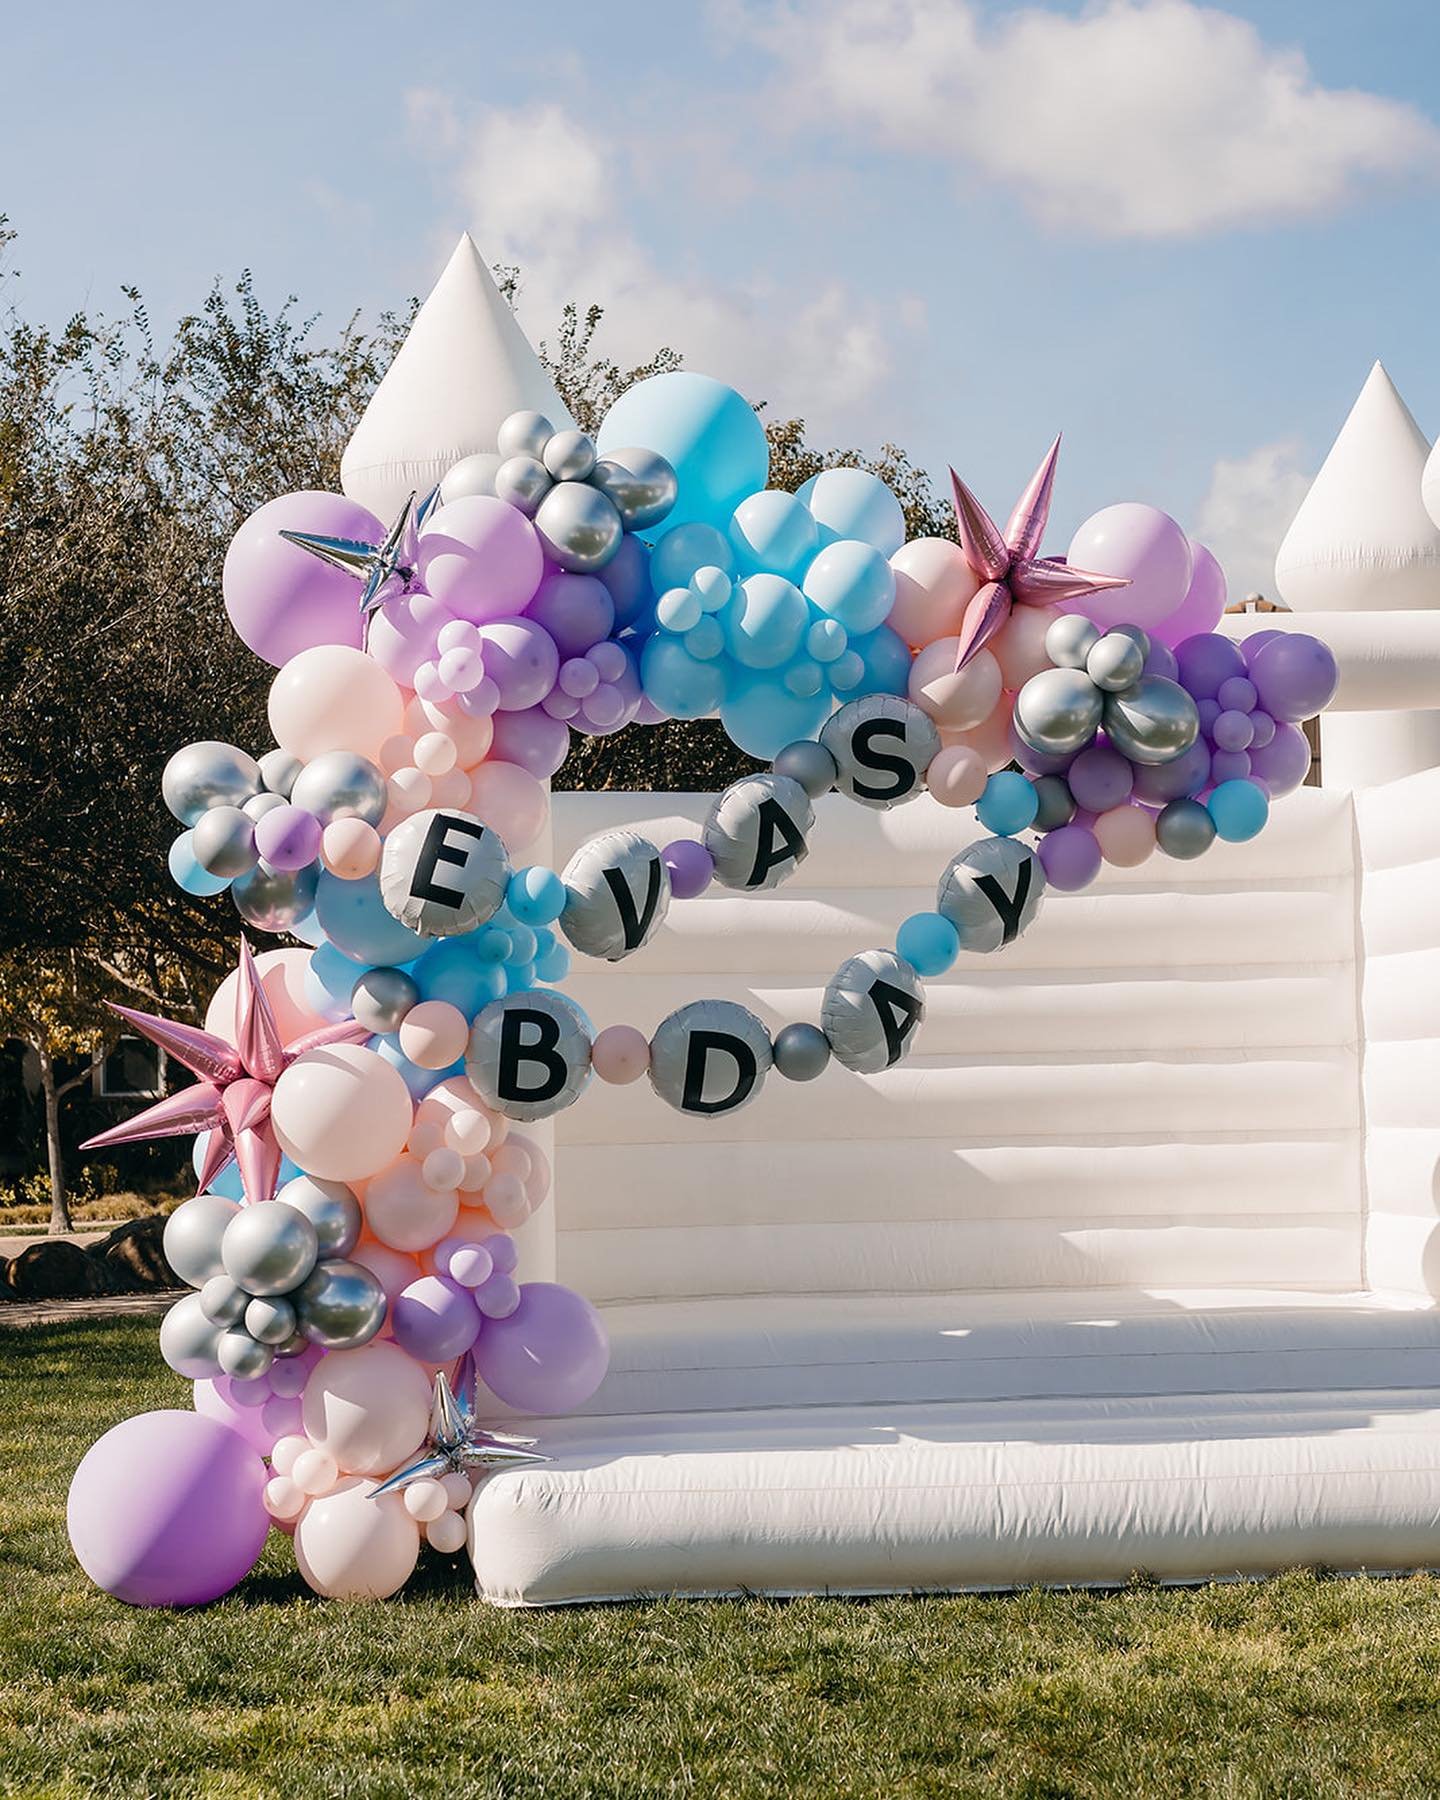 In honor of all the swifties celebrating #ttpd today, here&rsquo;s a little throwback to Eva in her birthday era featuring The Swan Lake and Classic Bubble House!!!

Forever here for all the swiftie themed events 🤍